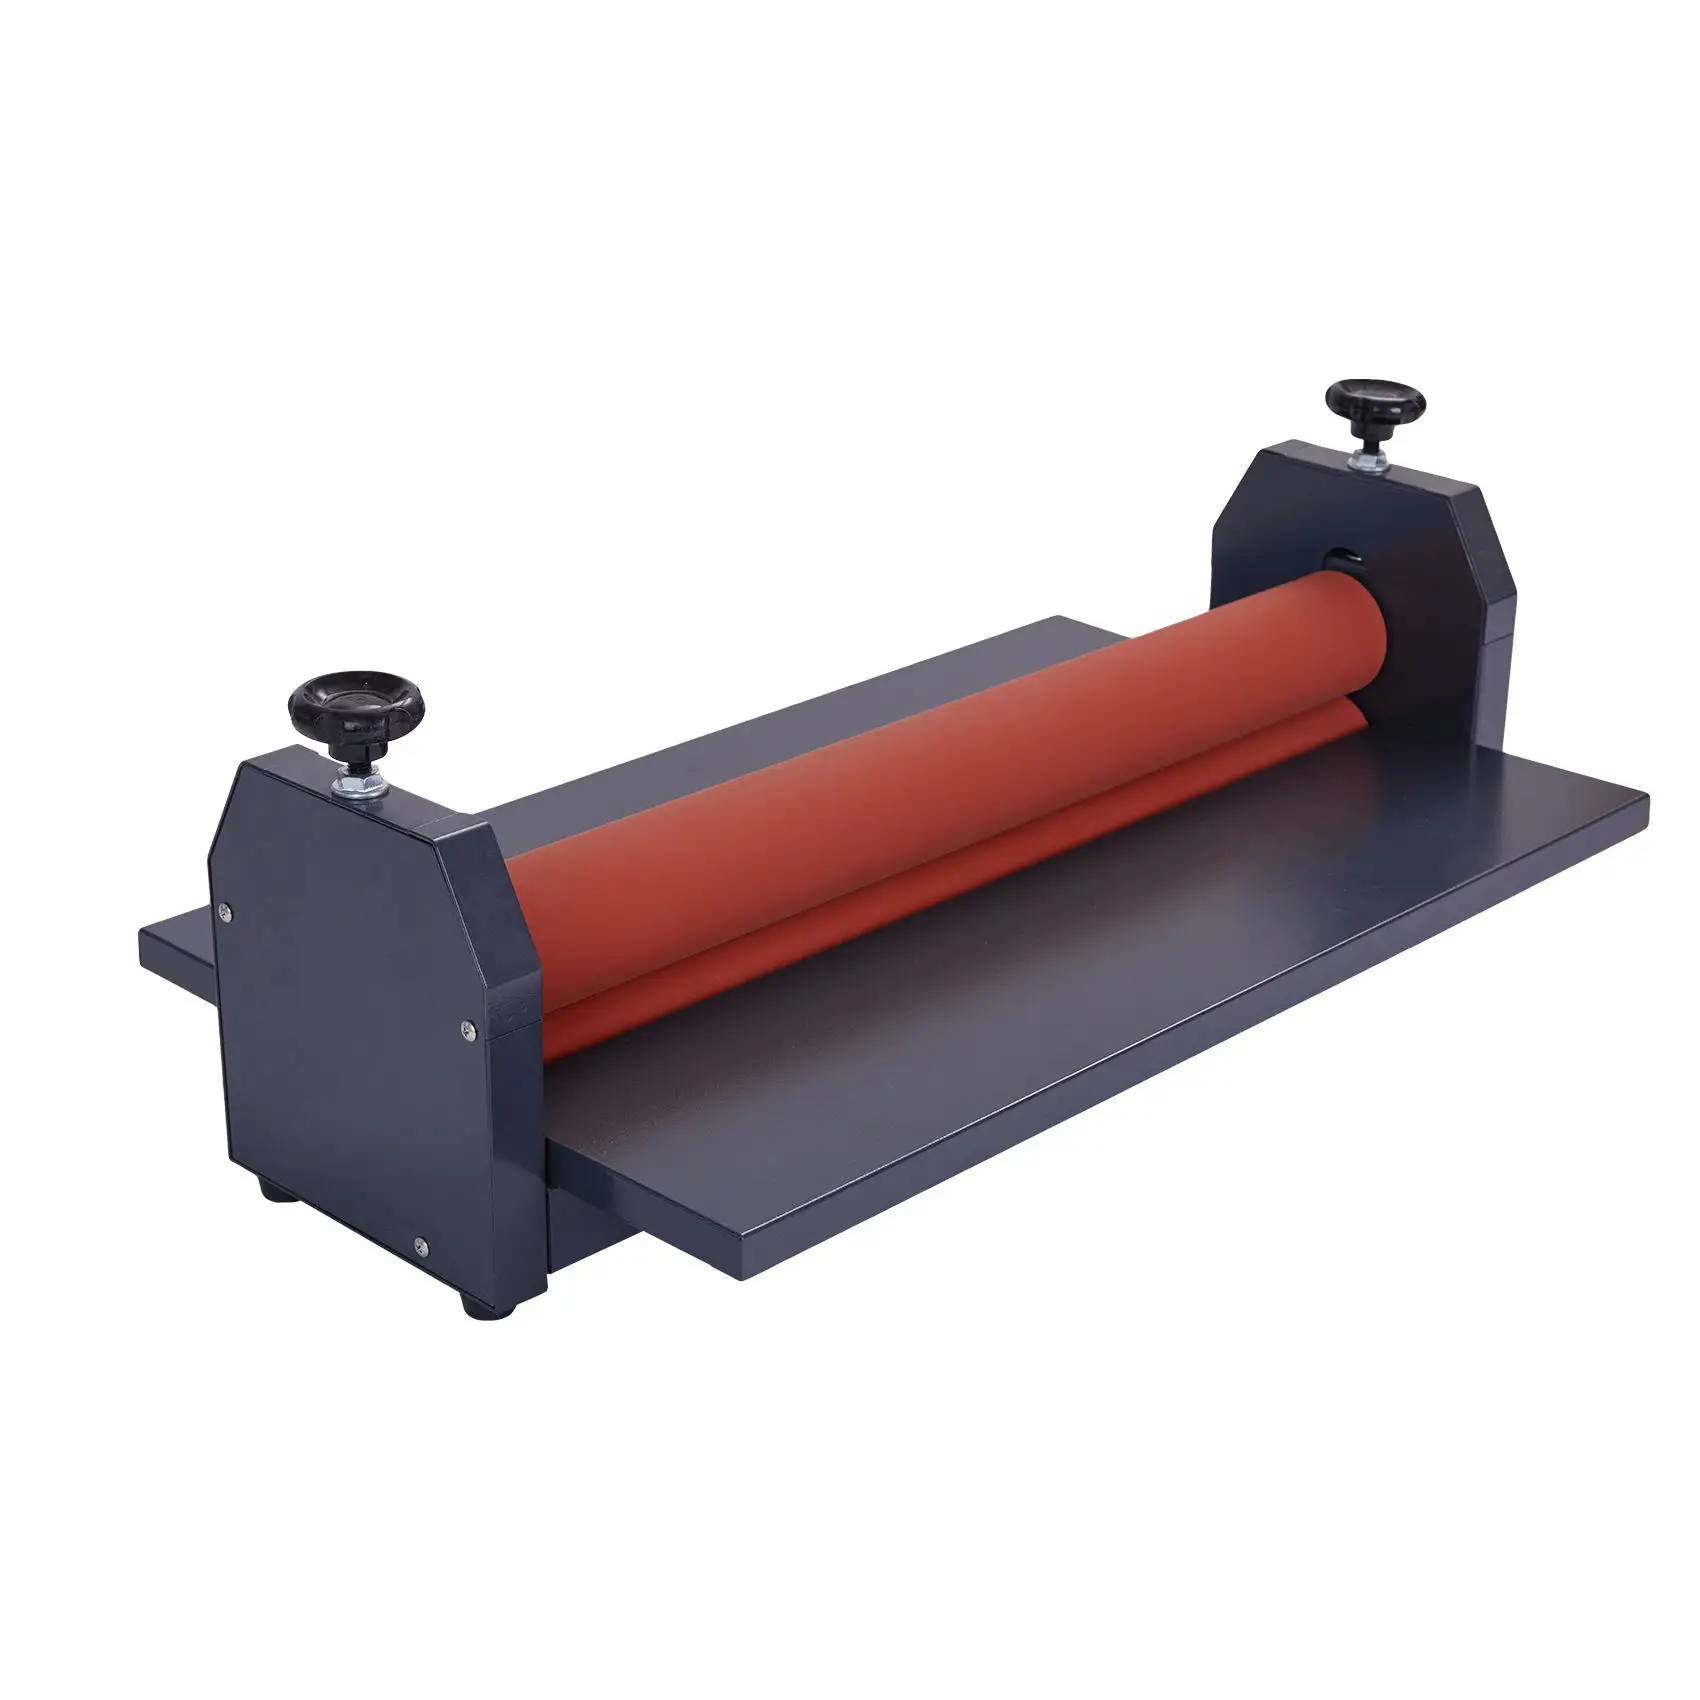 Manual Cold Lamination Machine 700mm Desktop Cold Roll Laminator with High Quality Rubber Rollers